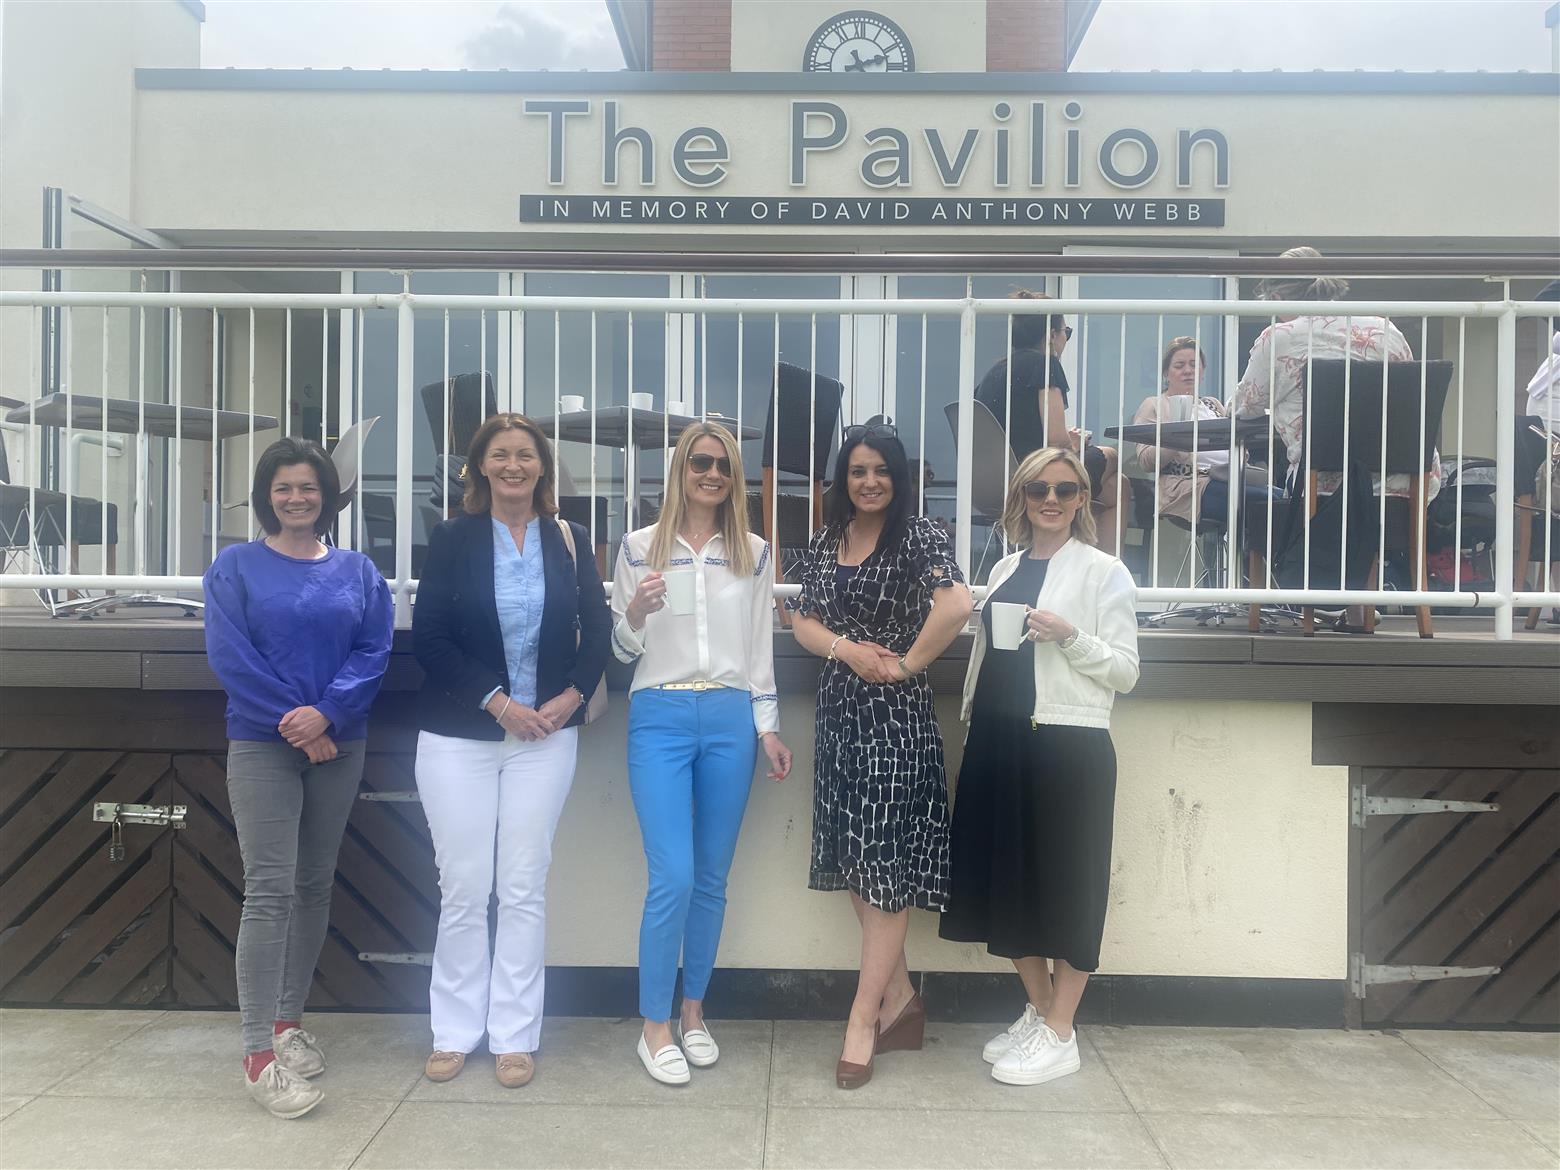 Ladies Luncheon Club 2023/24 programme launched